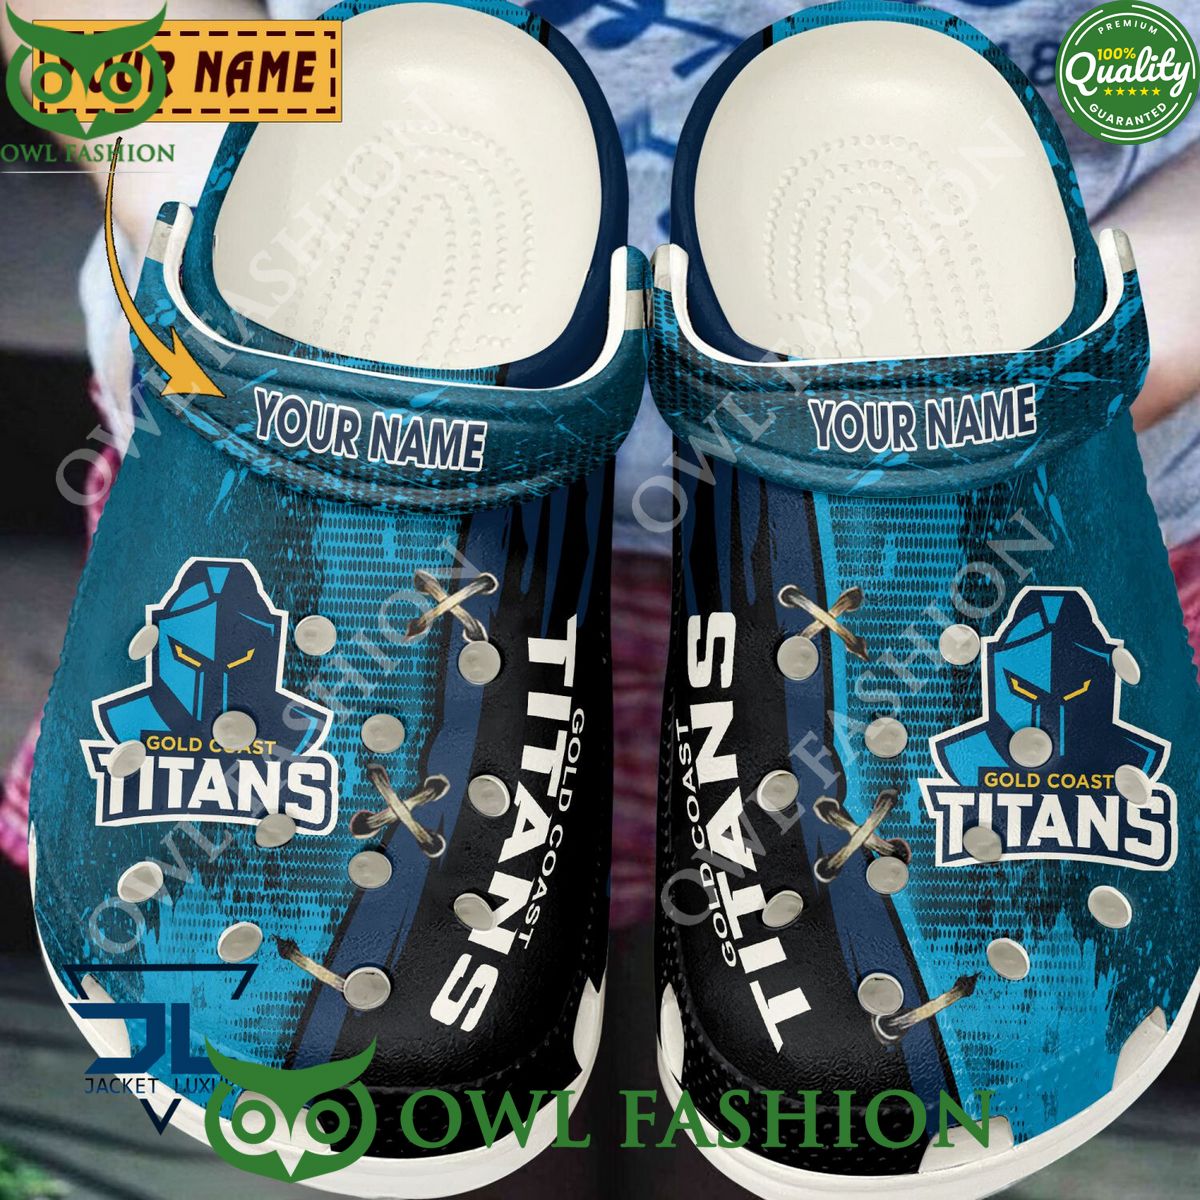 Personalized Gold Coast Titans National Rugby League Football Club crocs